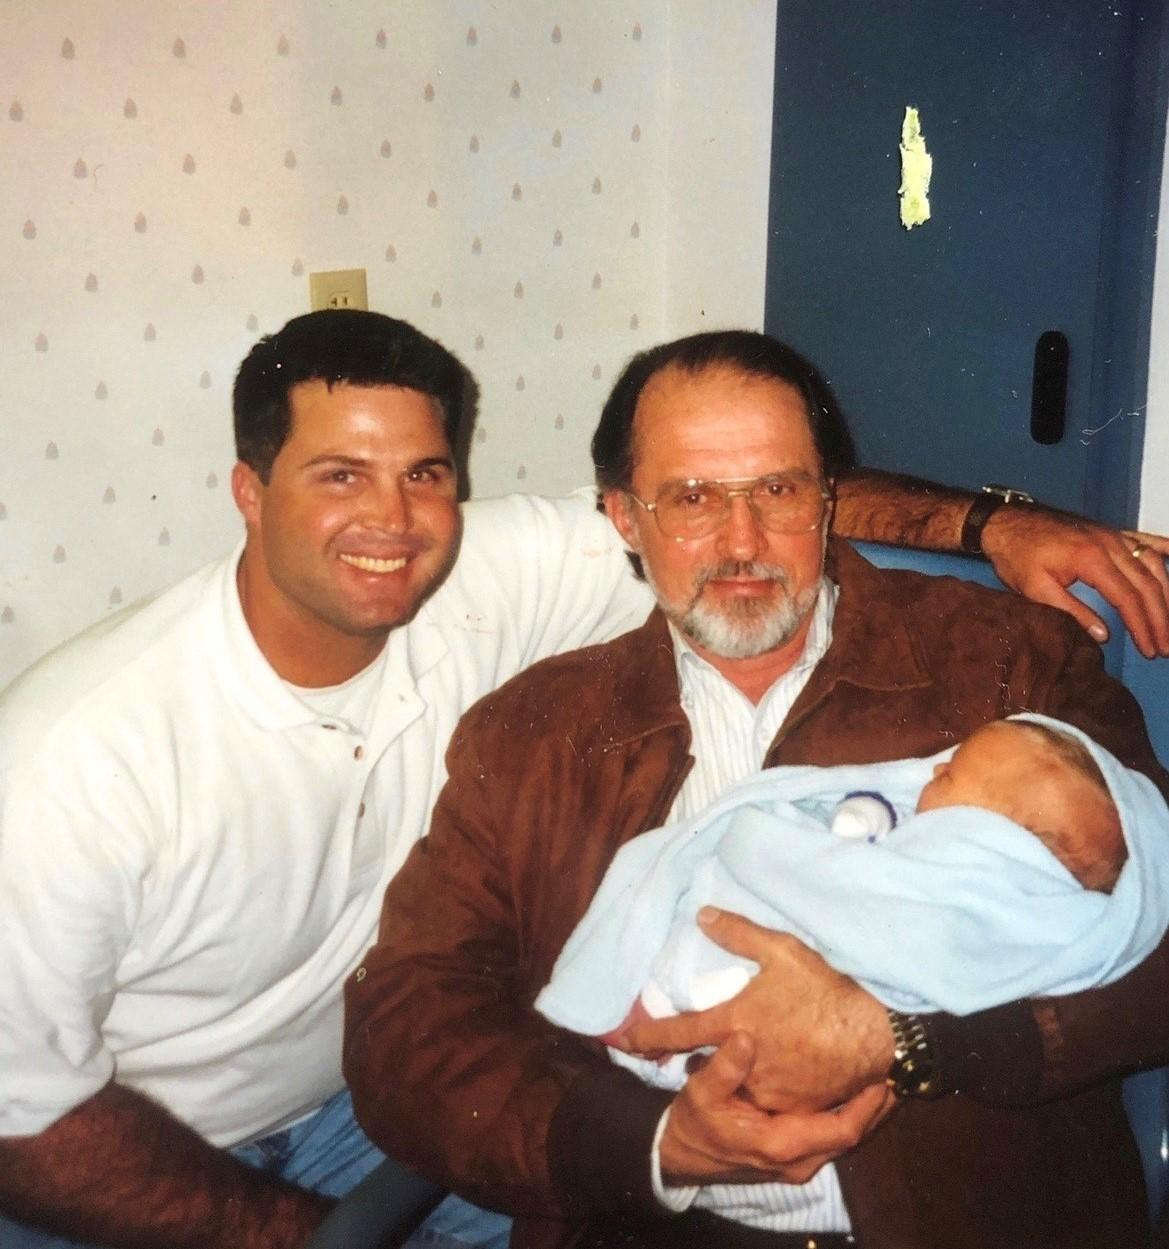  Michael Sr. and Kenneth with Michael Jr. in his arms. (Courtesy of <a href="https://www.instagram.com/mtoddhaworth/">Michael Todd Haworth</a>)